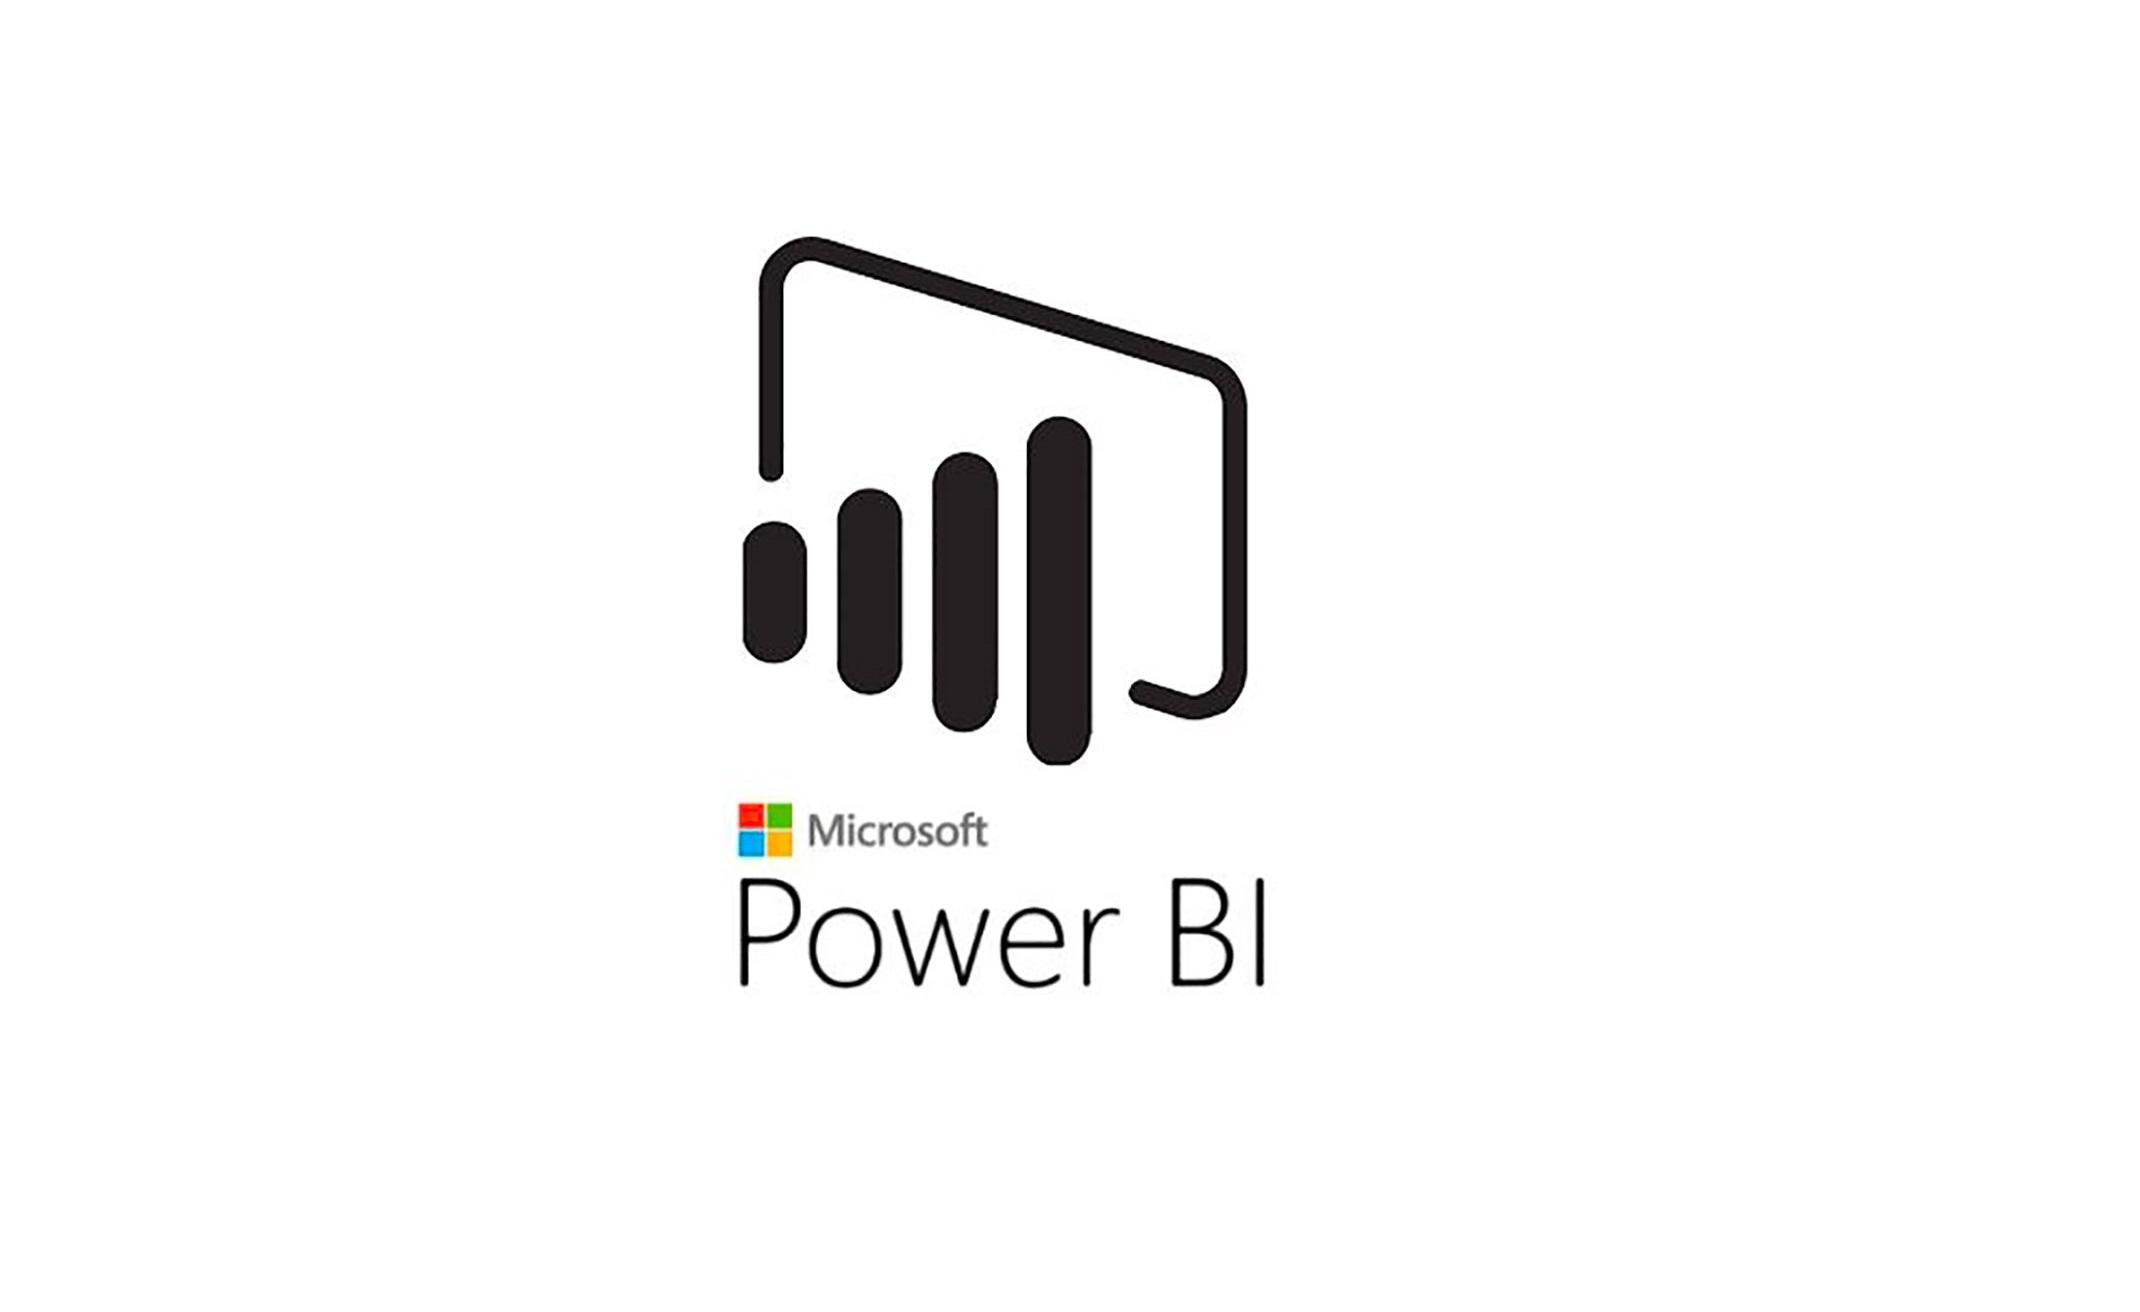 Microsoft Power BI Training in Richmond | Introduction to Power BI training for beginners | Getting started with Power BI | What is Power BI | January 20, 2020 - February 12, 2020